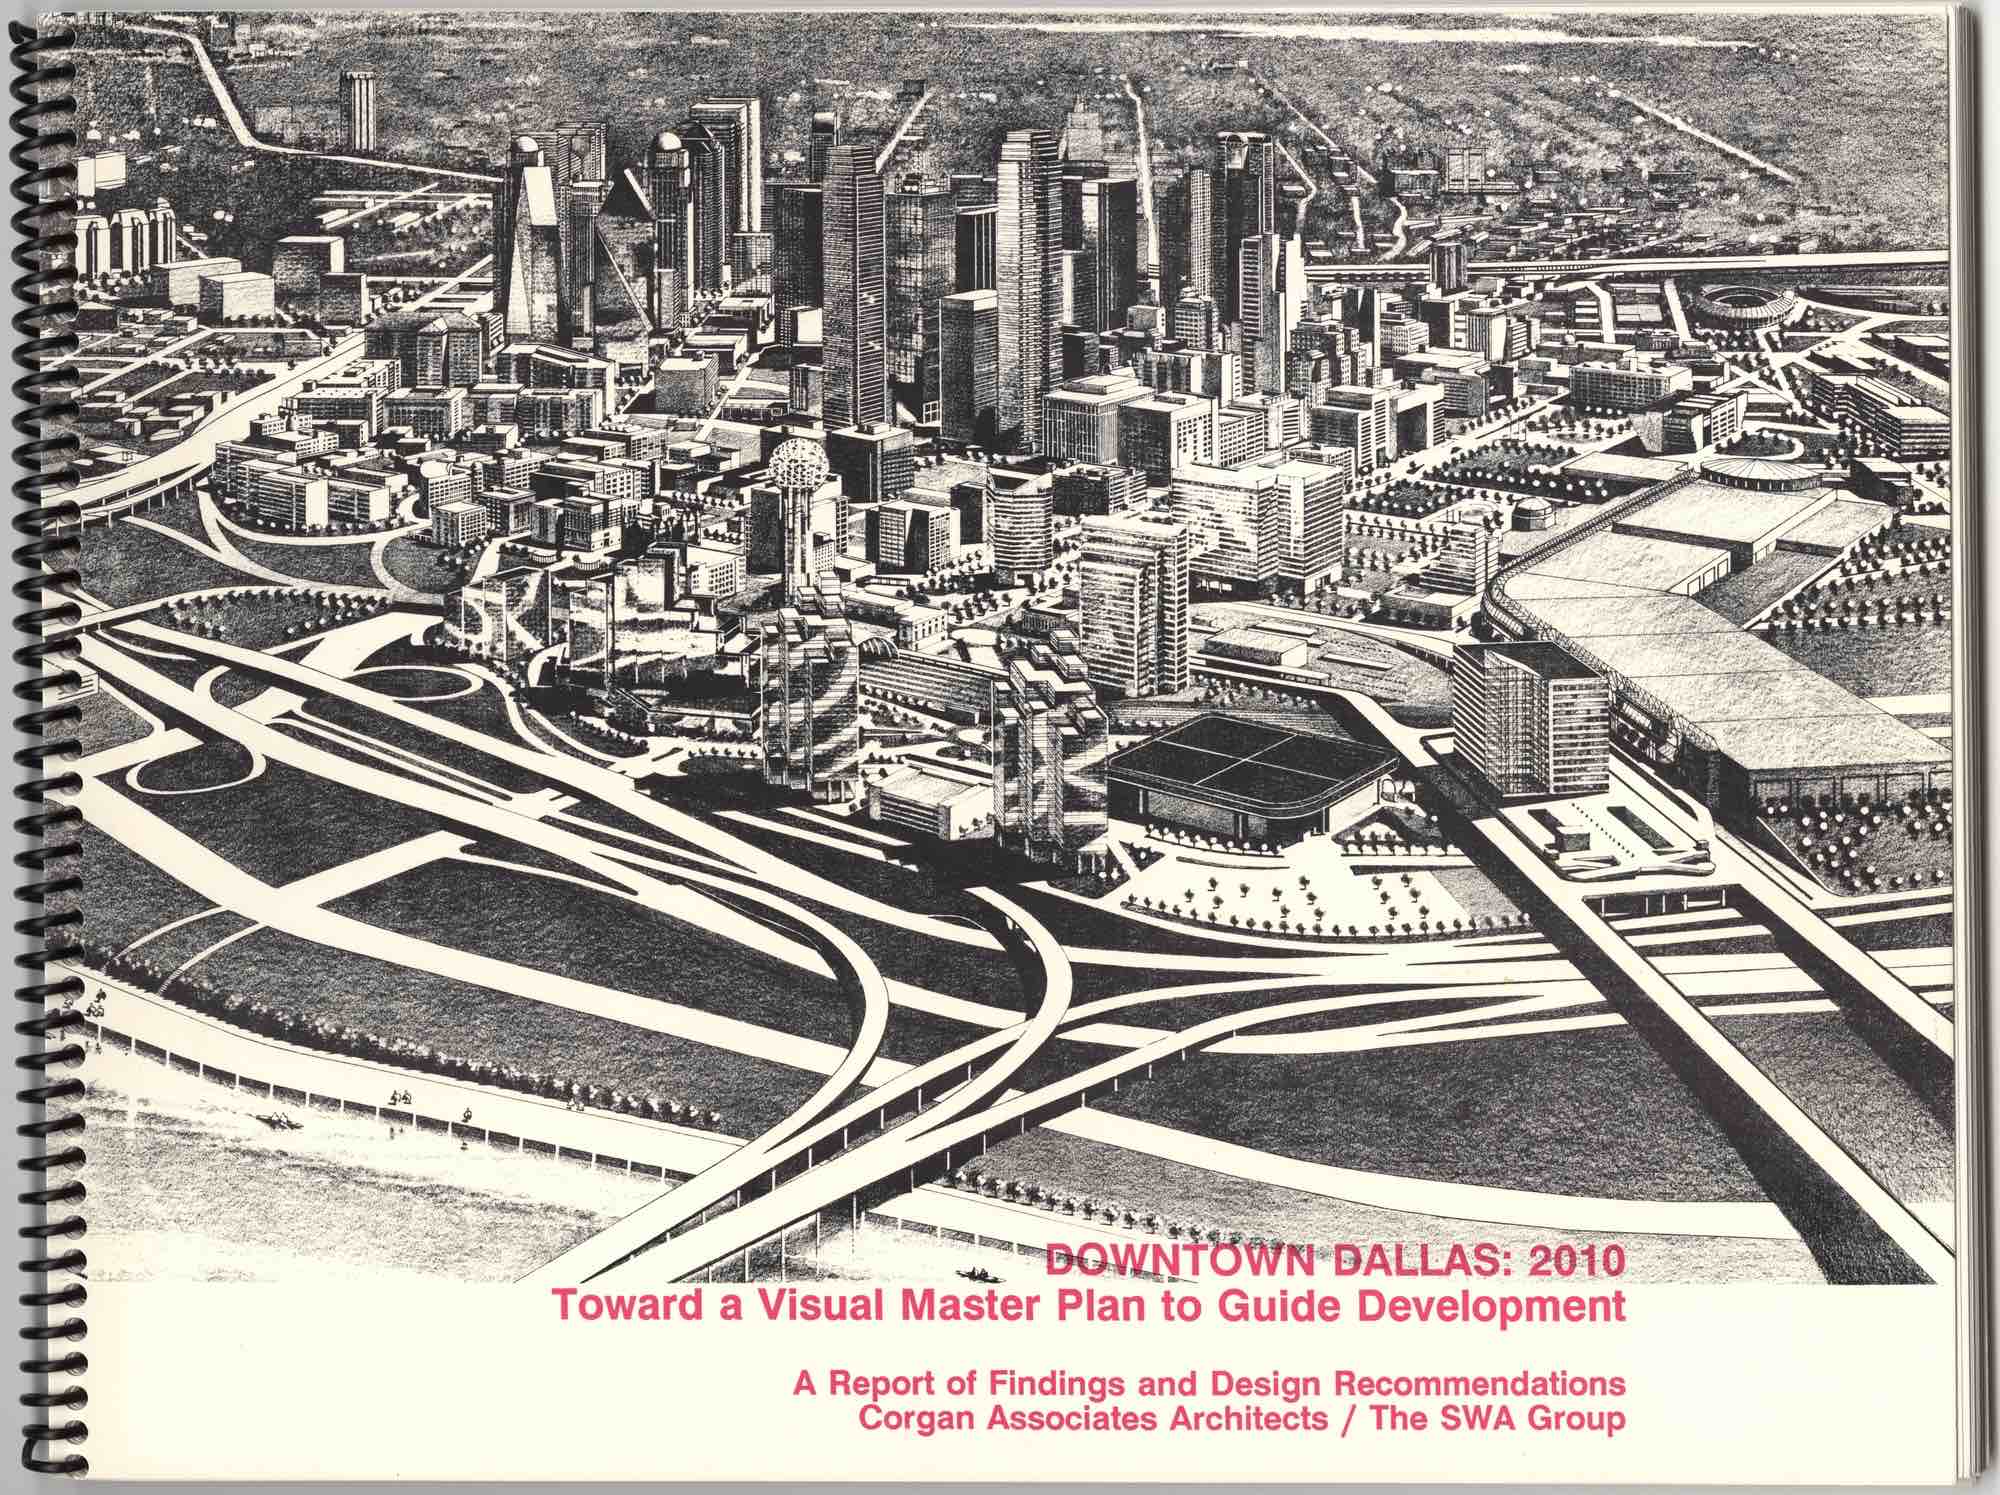 Image is of a spiral bound book.  On the cover is a sketch of downtown Dallas, Texas.  Printed across the bottom of the cover are the words "Downtown Dallas: 2010; Toward a Visual Master Plan to Guide Development; A Report of Findings and Design Recommendations; Corgan Associates Architects / The SWA Group